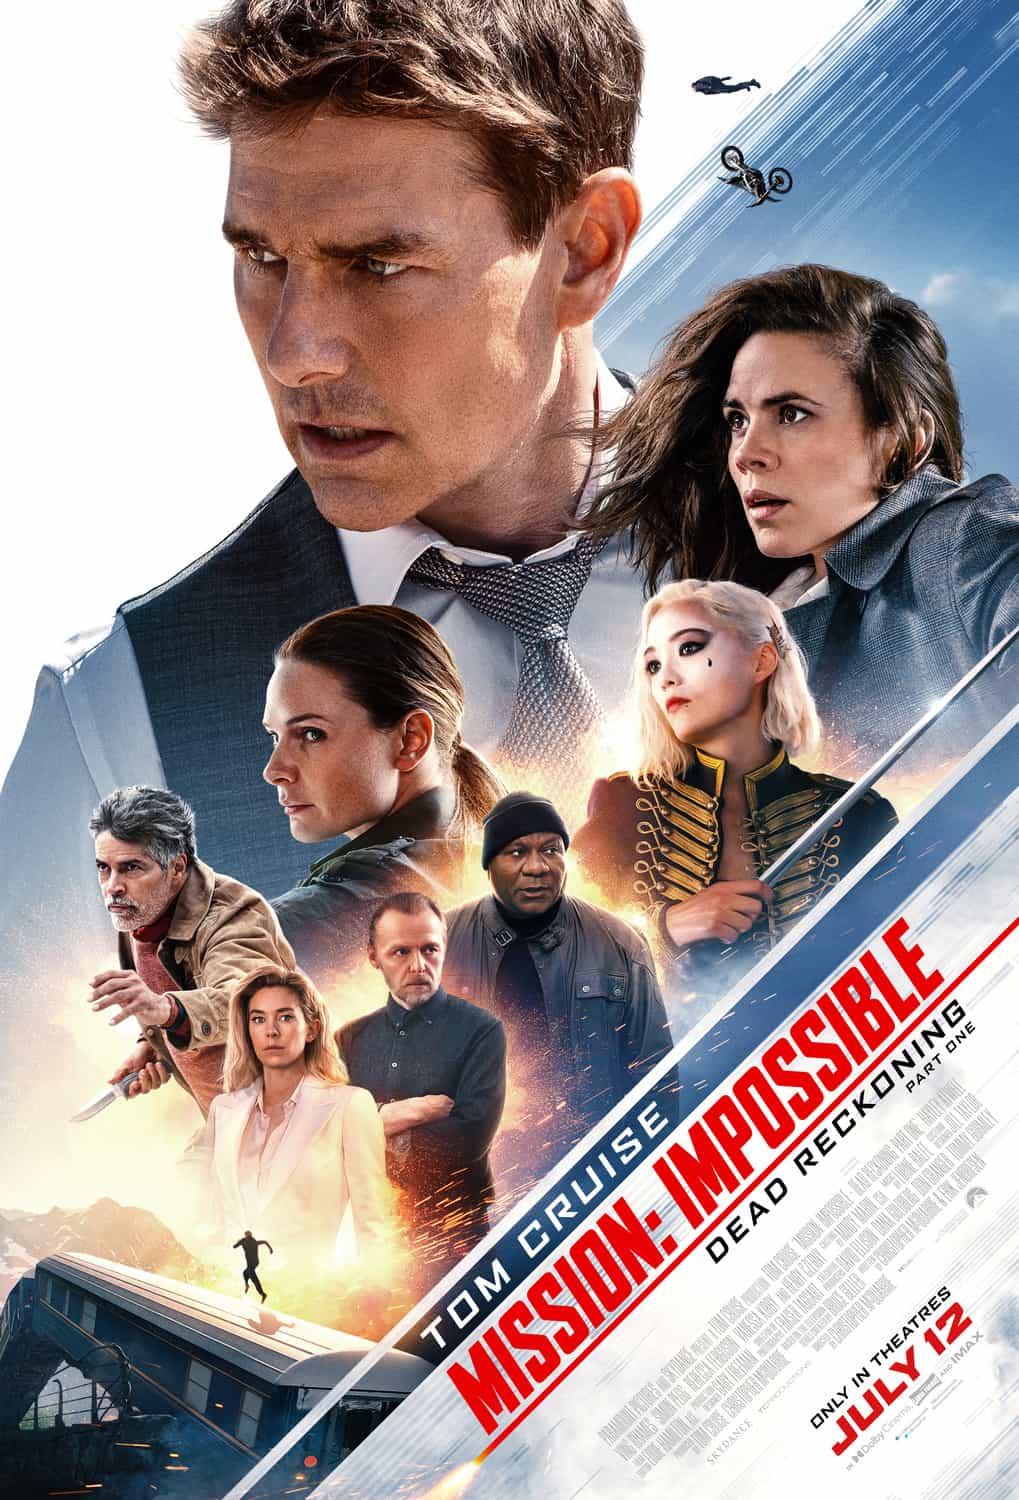 This weeks UK new movie preview 14th July 2023 - Mission:Impossible - Dead Reckoning Part 1 and Lost In the Stars - #missionimpossibledeadreckoningpart1 #lostinthestars